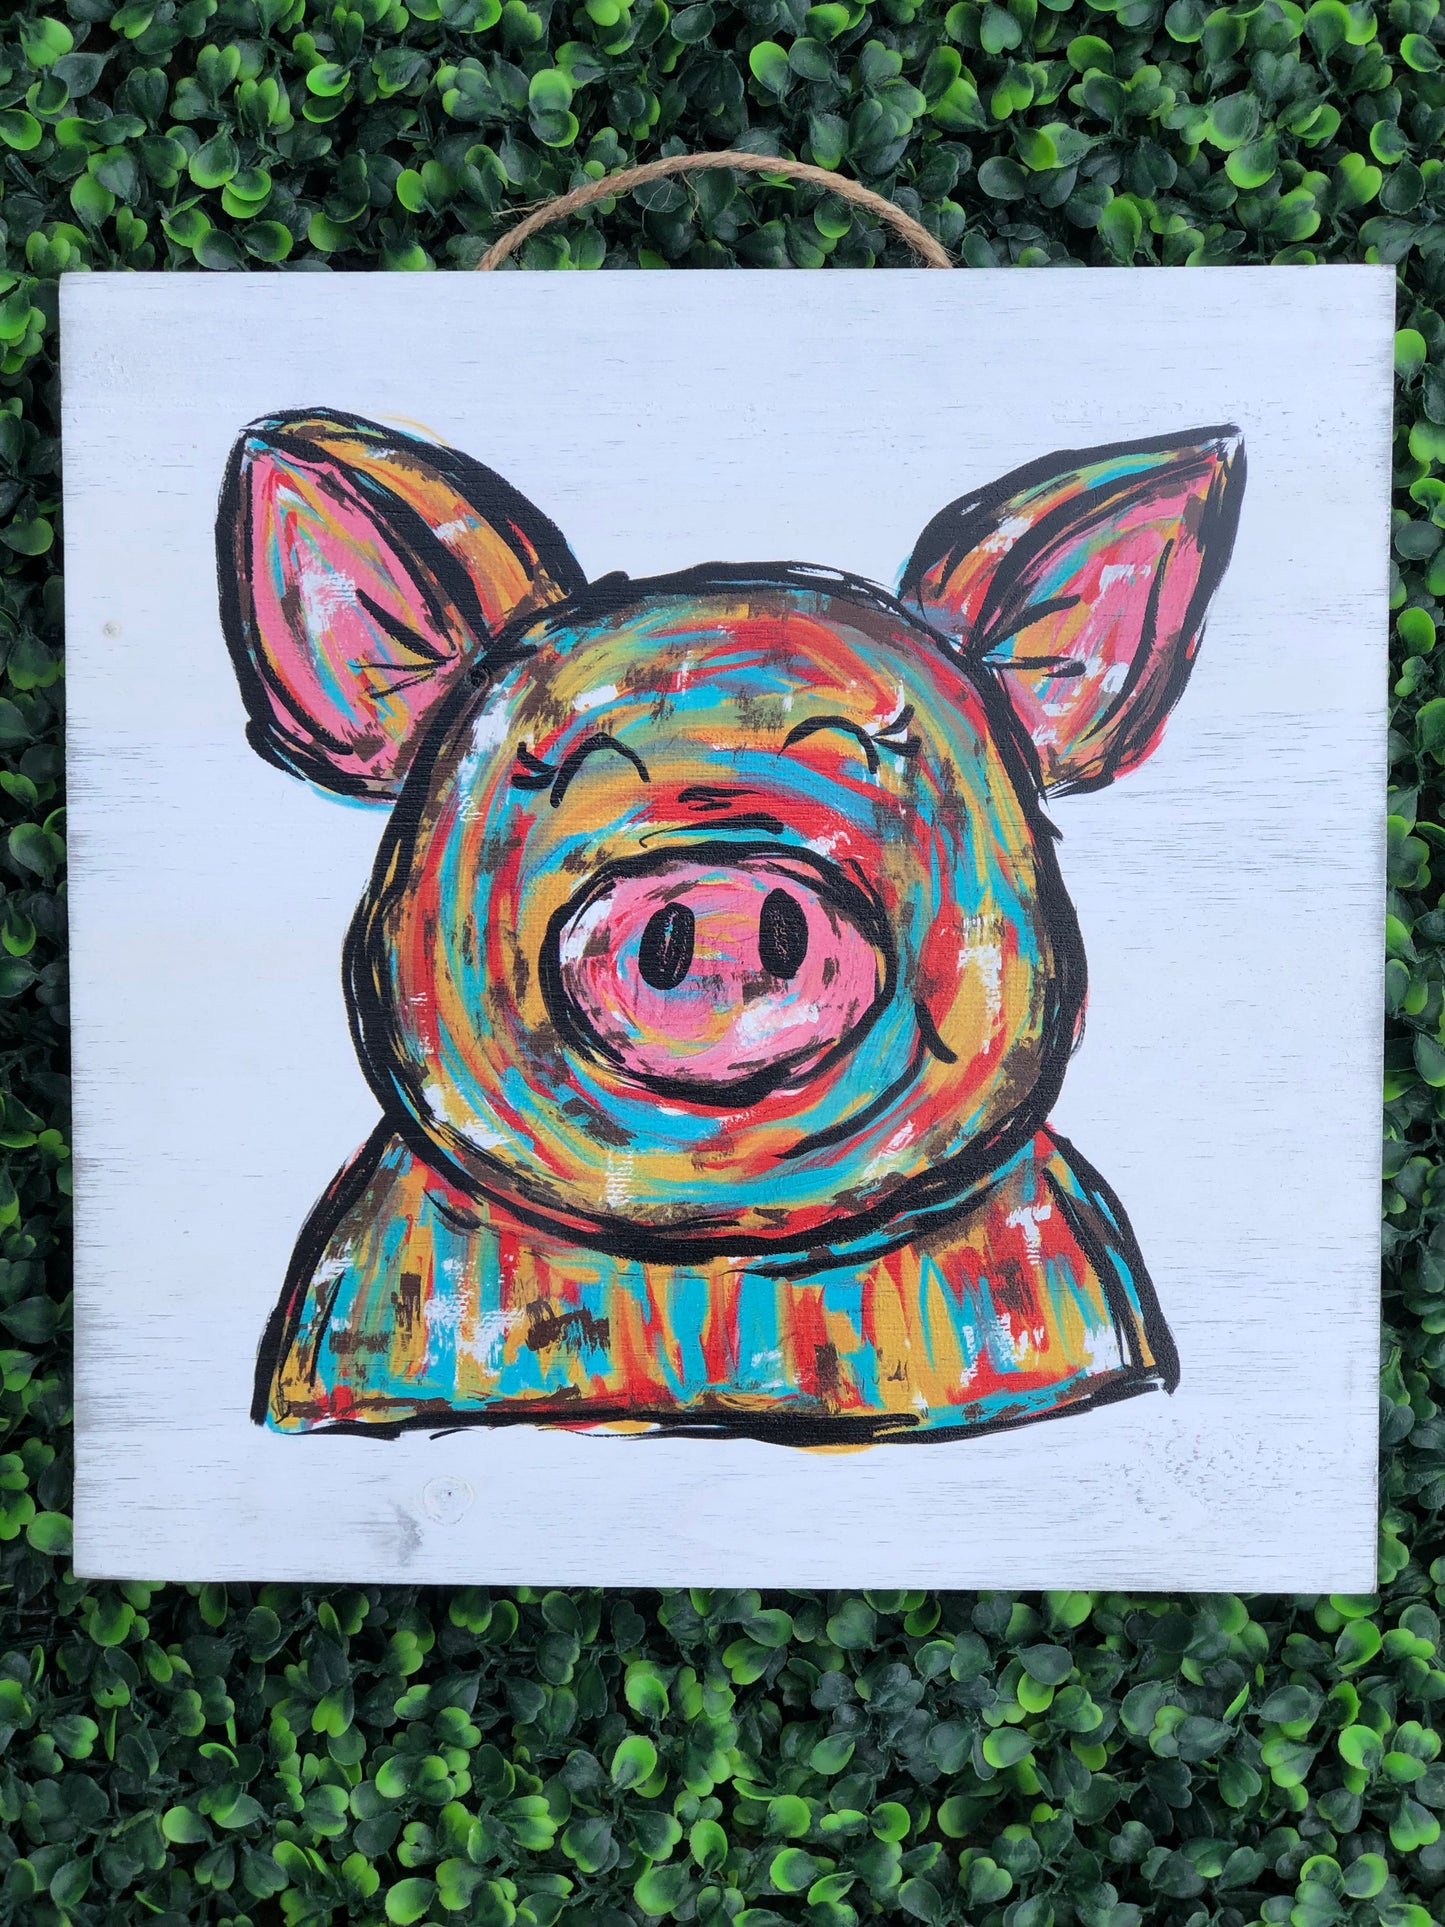 10" x 10" Colorful pig wooden sign